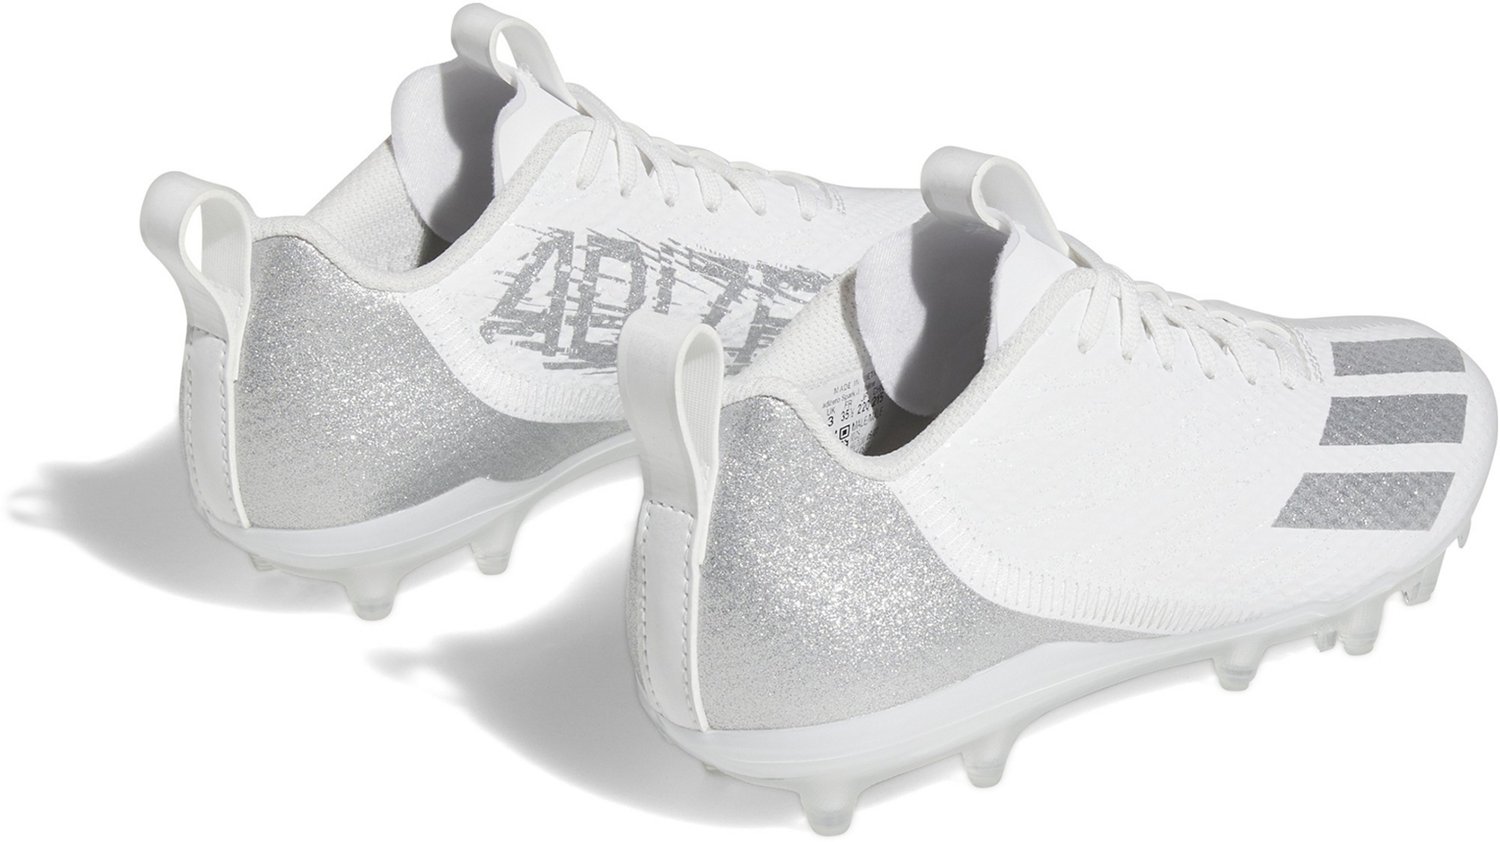 adidas Youth adizero Spark Football Cleats                                                                                       - view number 4